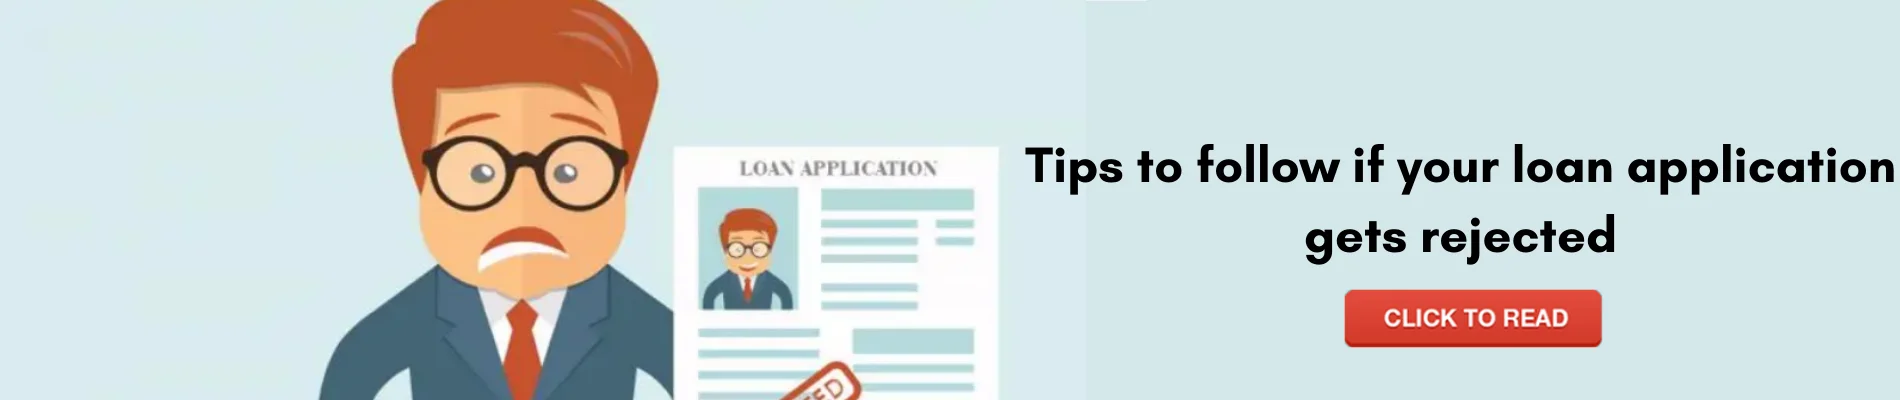 Top reasons your loan application was rejected even with an excellent credit score